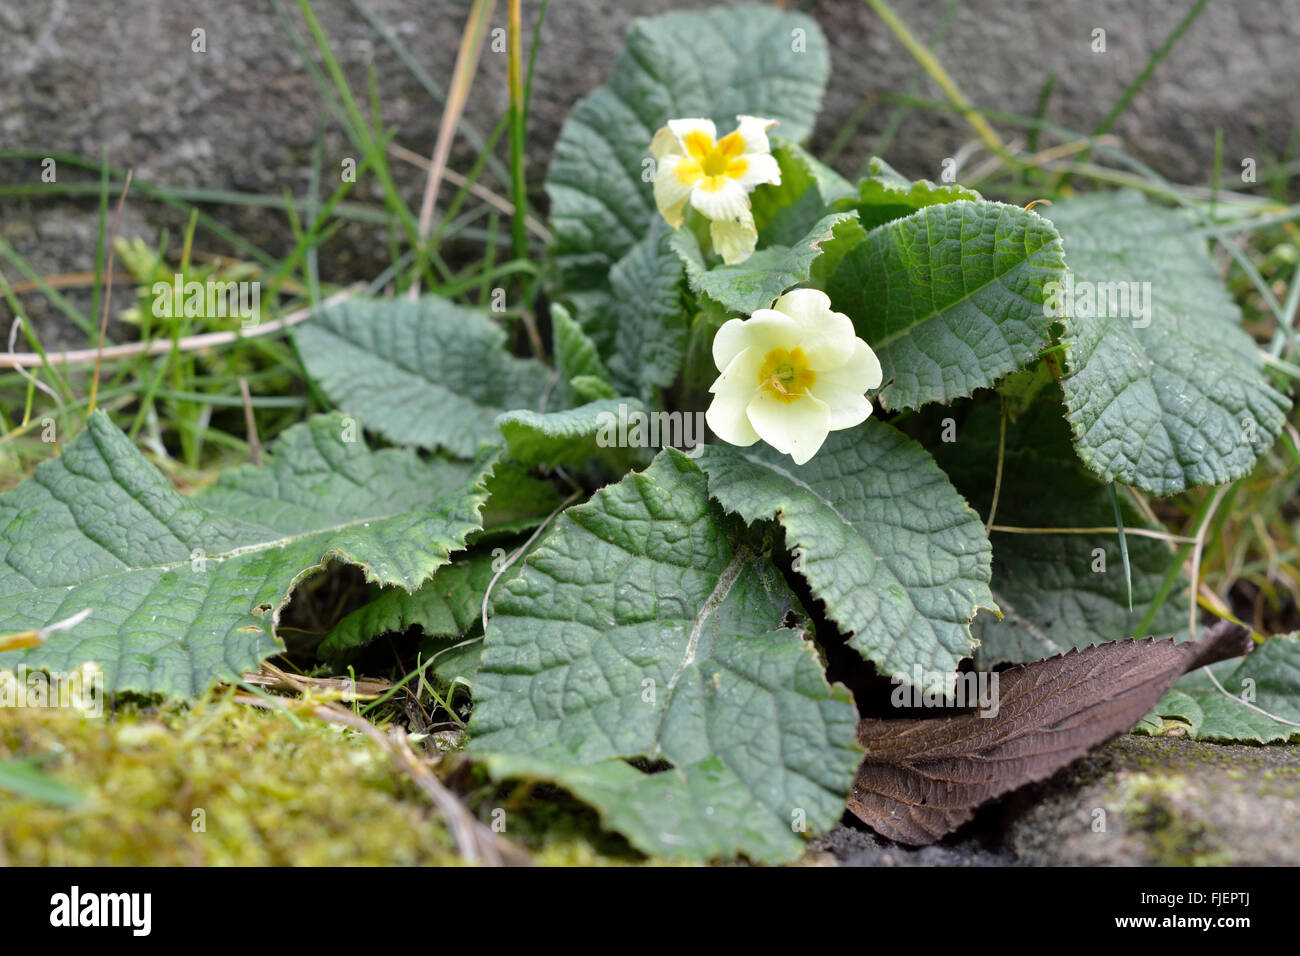 Primrose (Primula vulgaris). Yellow spring flower of plant in the family Primulaceae, flowering in a British woodland Stock Photo